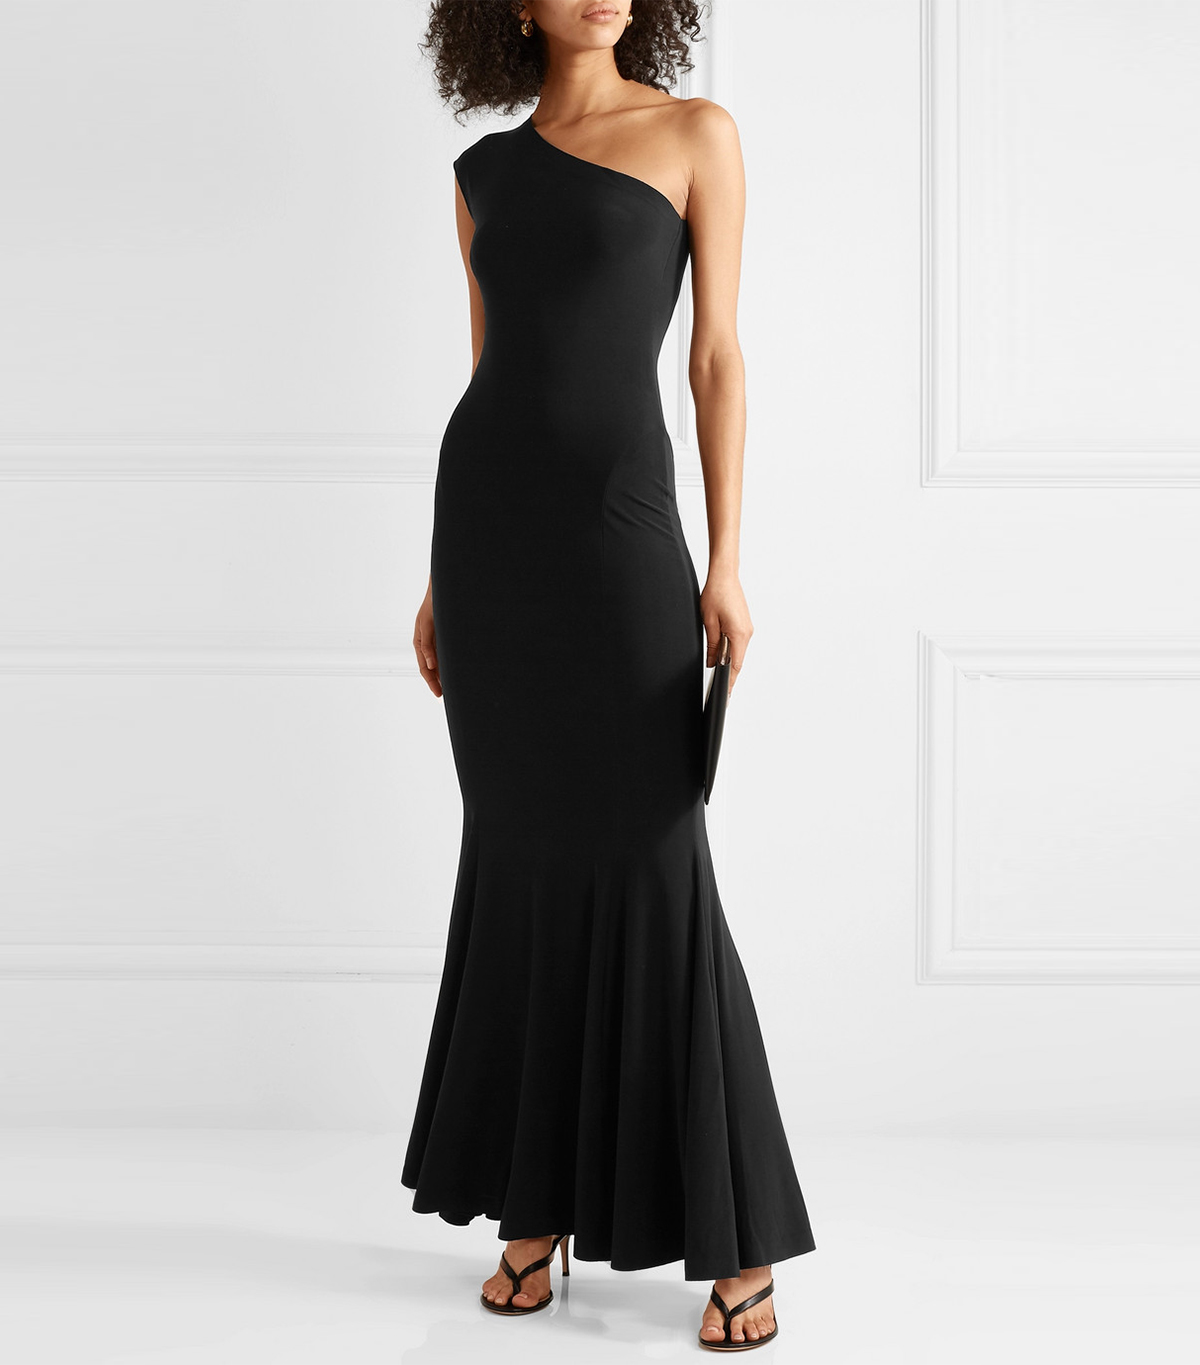 30 Mother of the Bride Dresses for Every Wedding Dress Code | Who What Wear